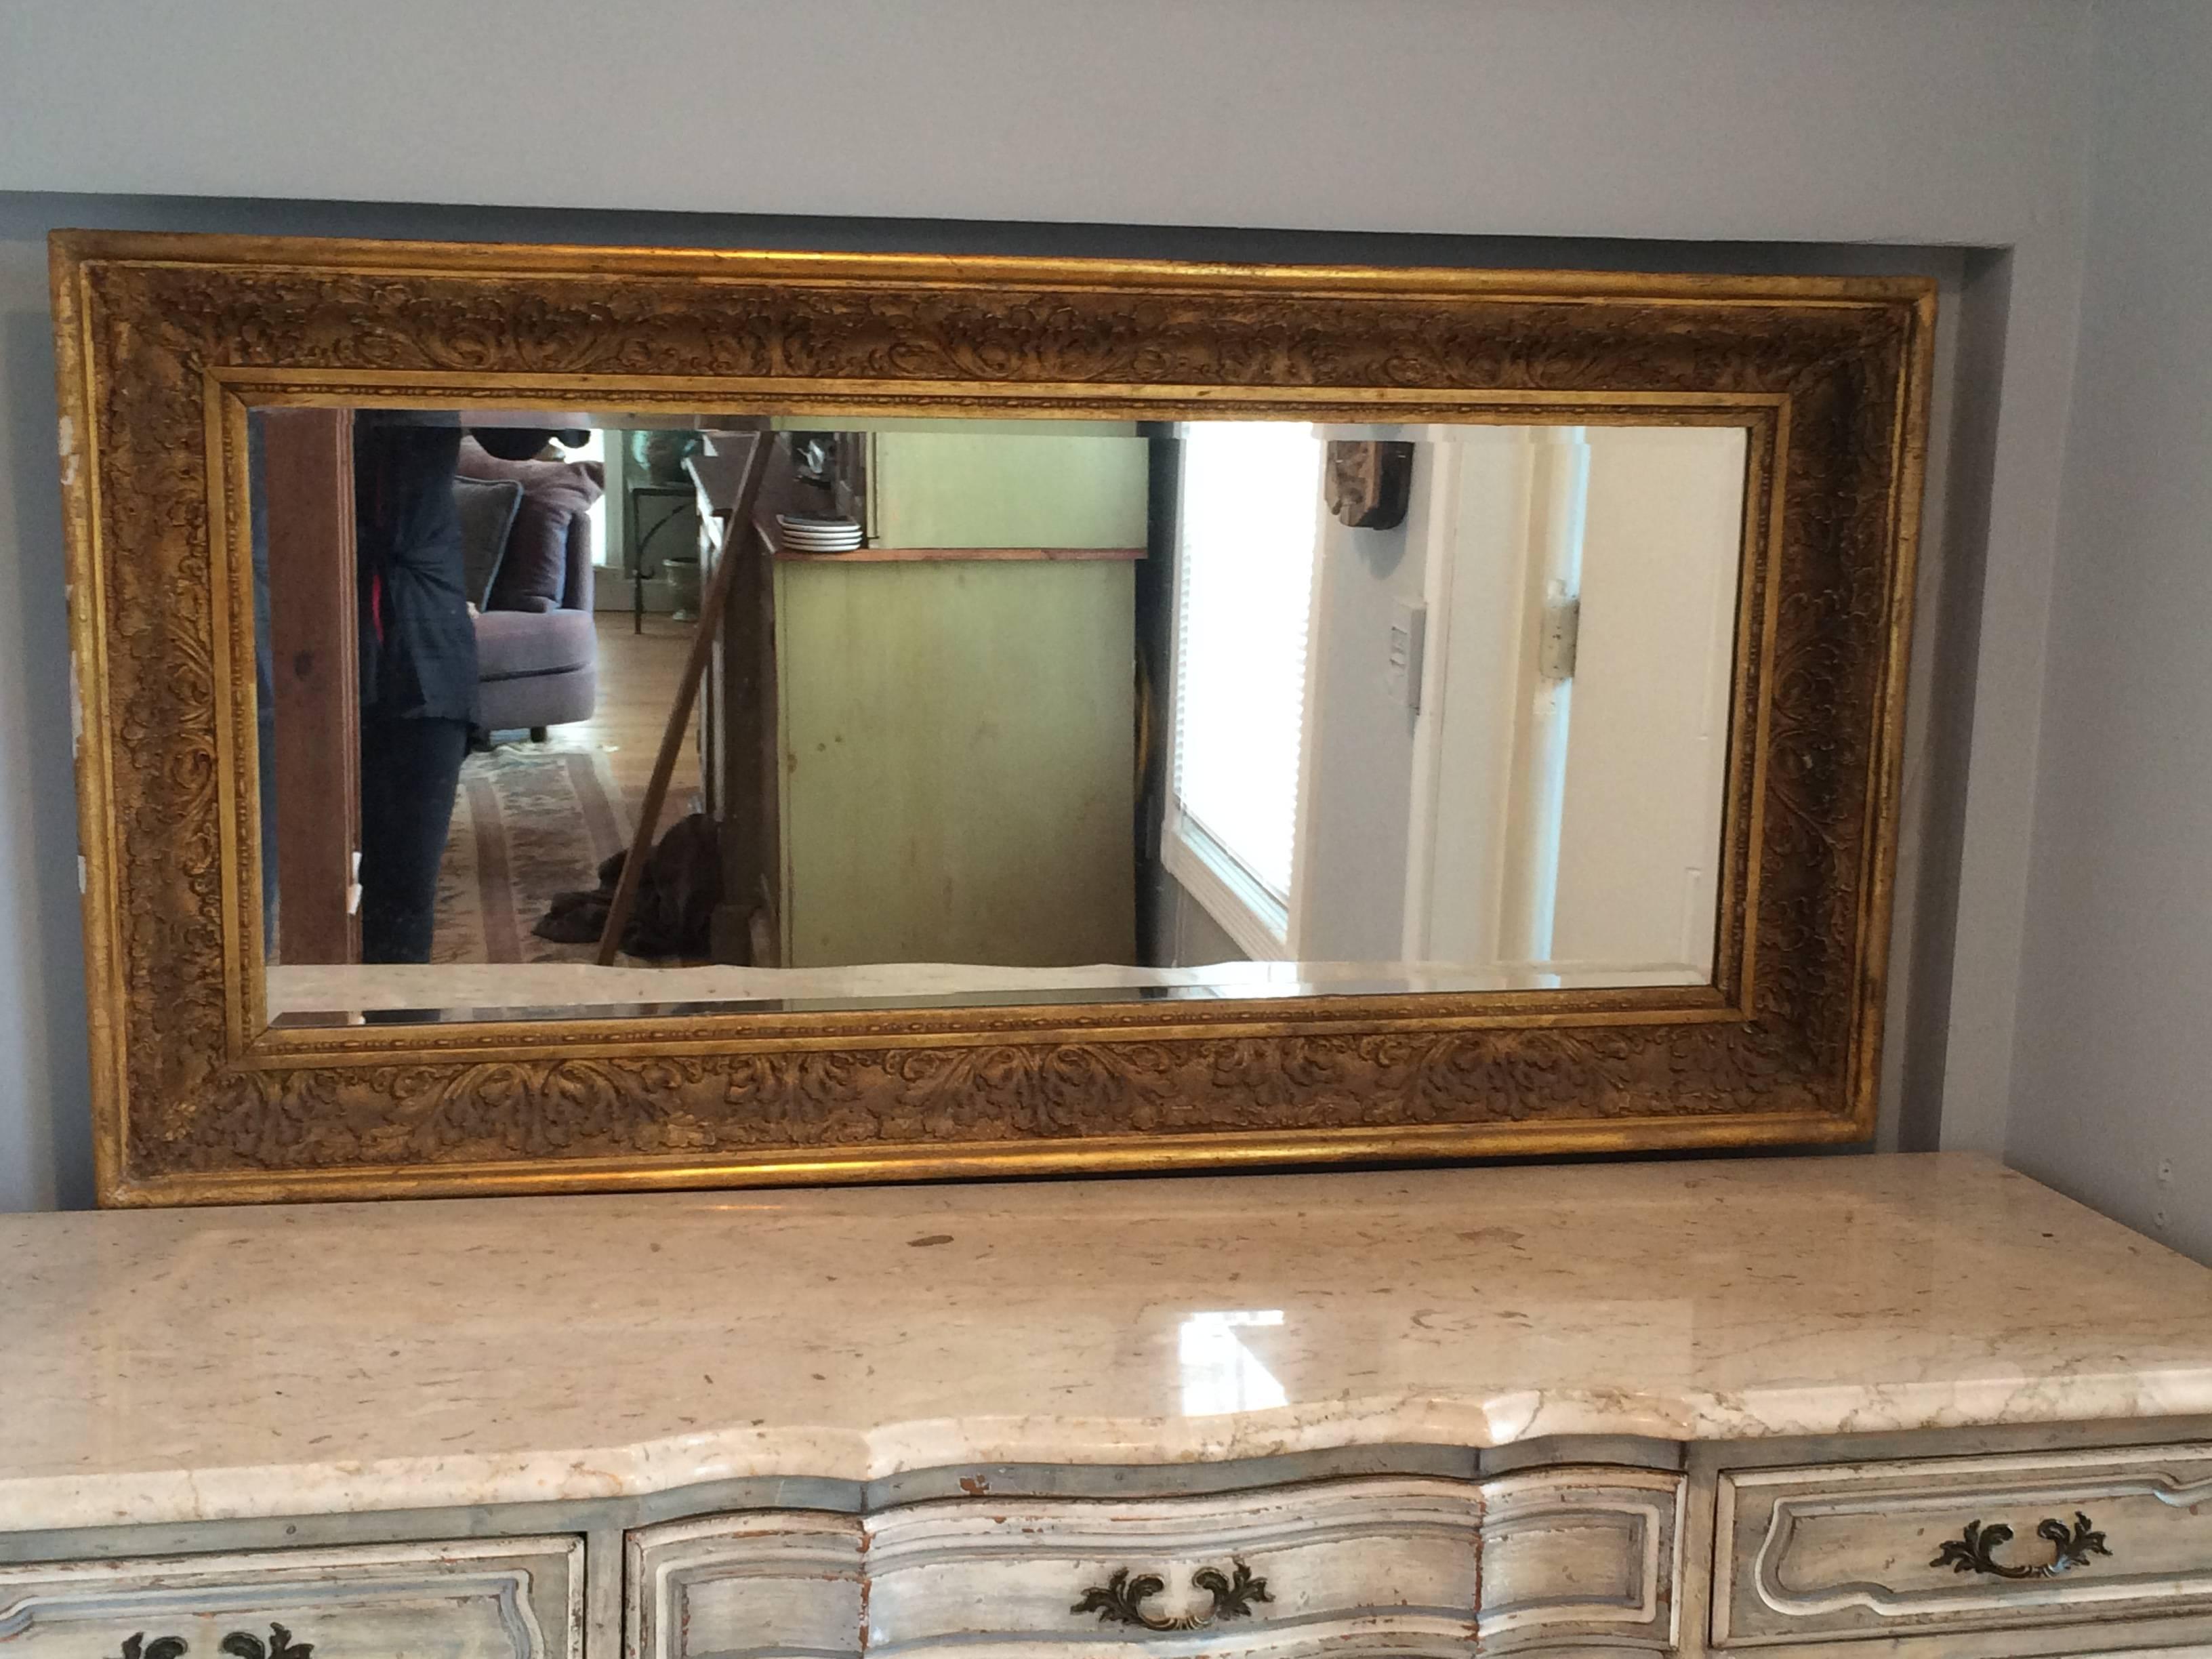 Large antique gilt mirror with half in bevel. Perfect for above a Mantel or foyer entrance. Can be hung vertically or horizontally. Thick, gilt and carved gesso design.